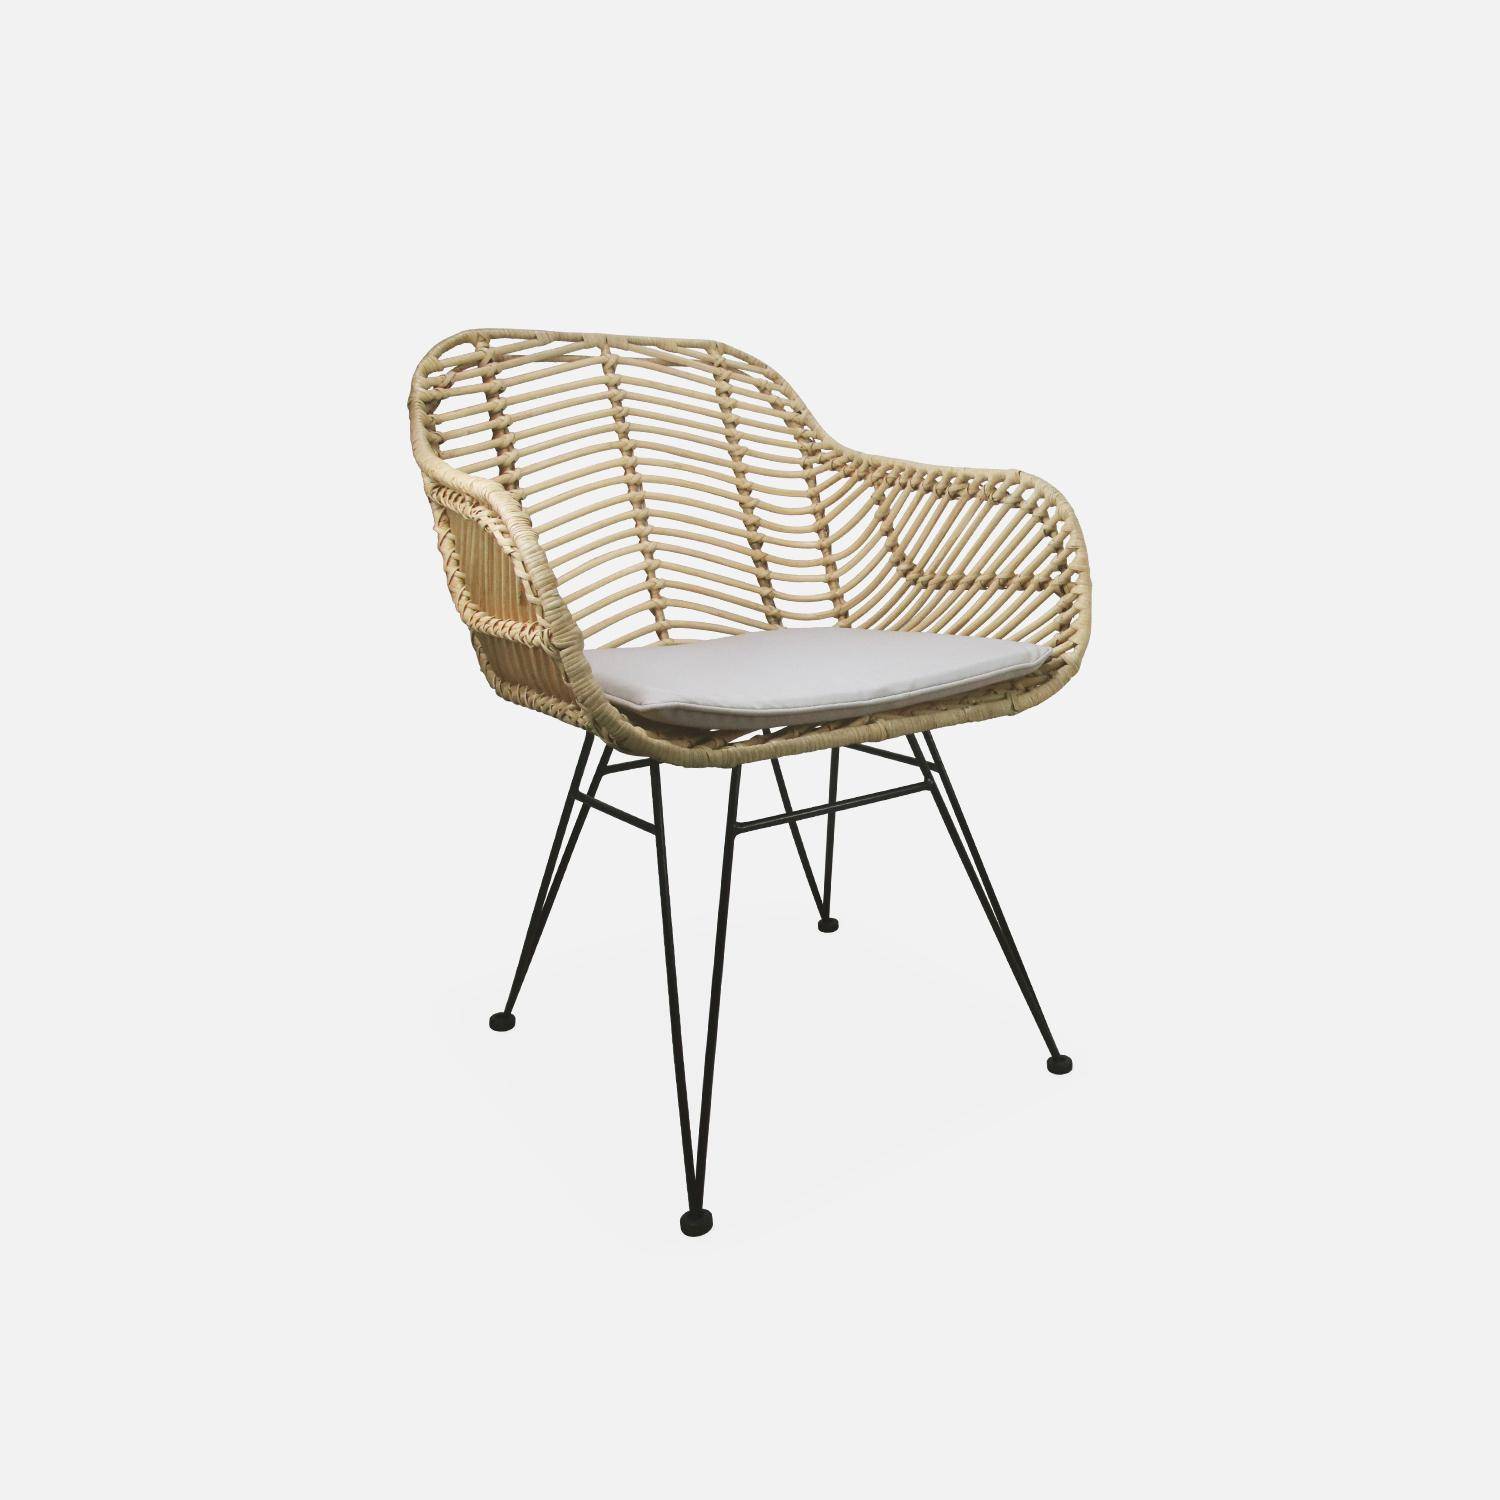 Rattan dining armchair with metal legs and cushion - Cahya - Natural rattan, White cushion Photo3